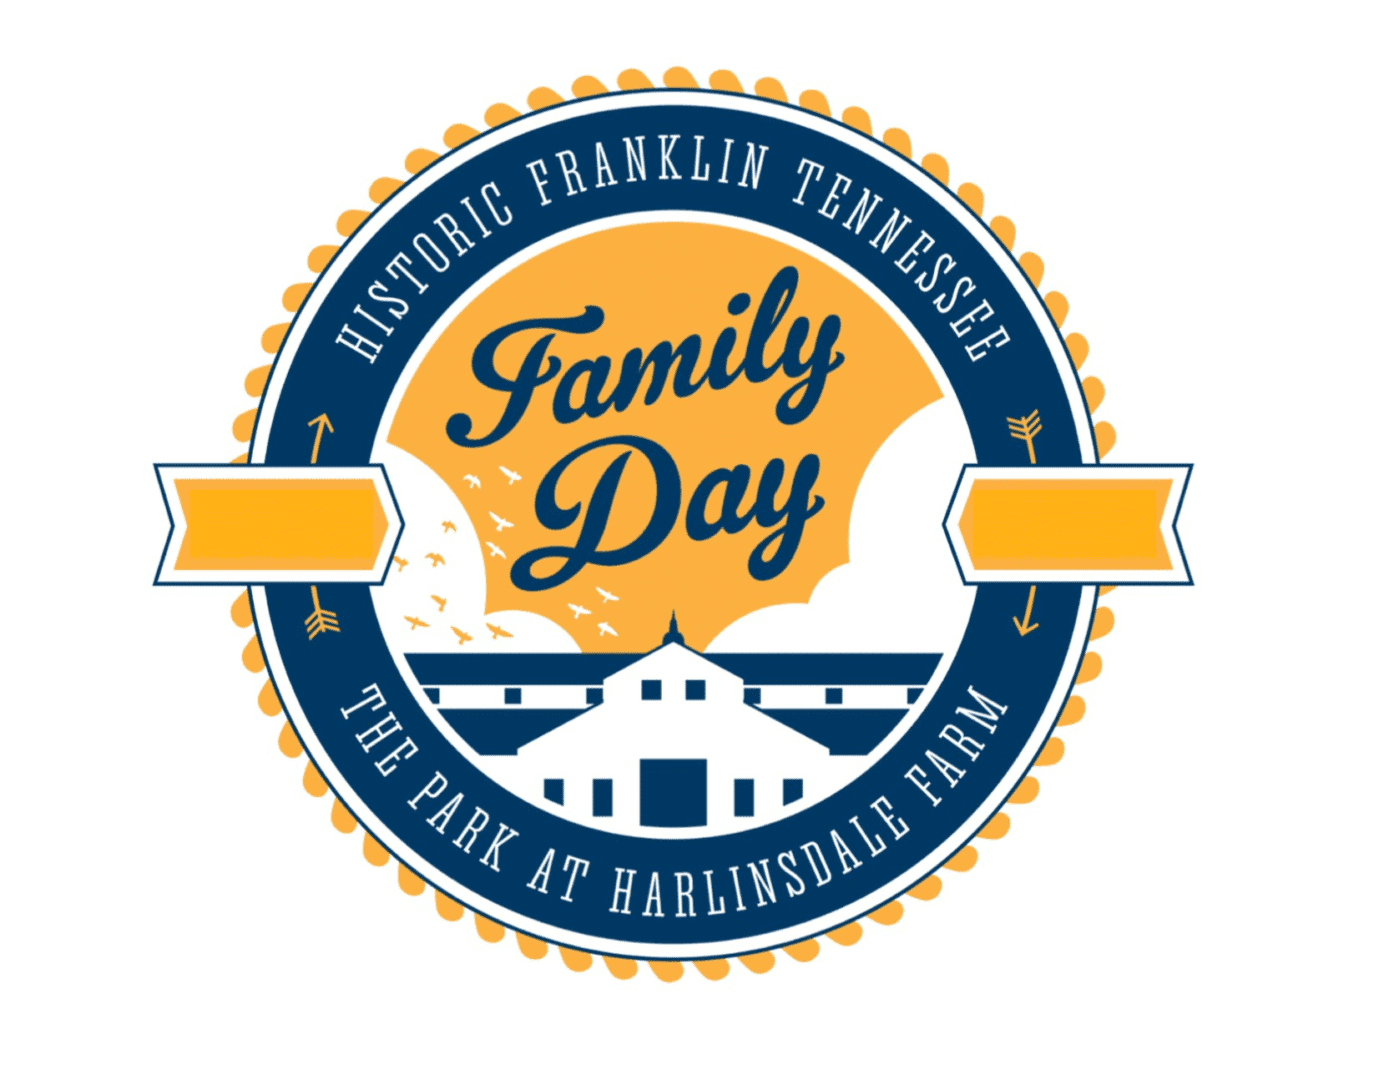 Family Day, family events in Franklin, TN, the festival offers kid’s activities, family fun, food, live entertainment and much more!